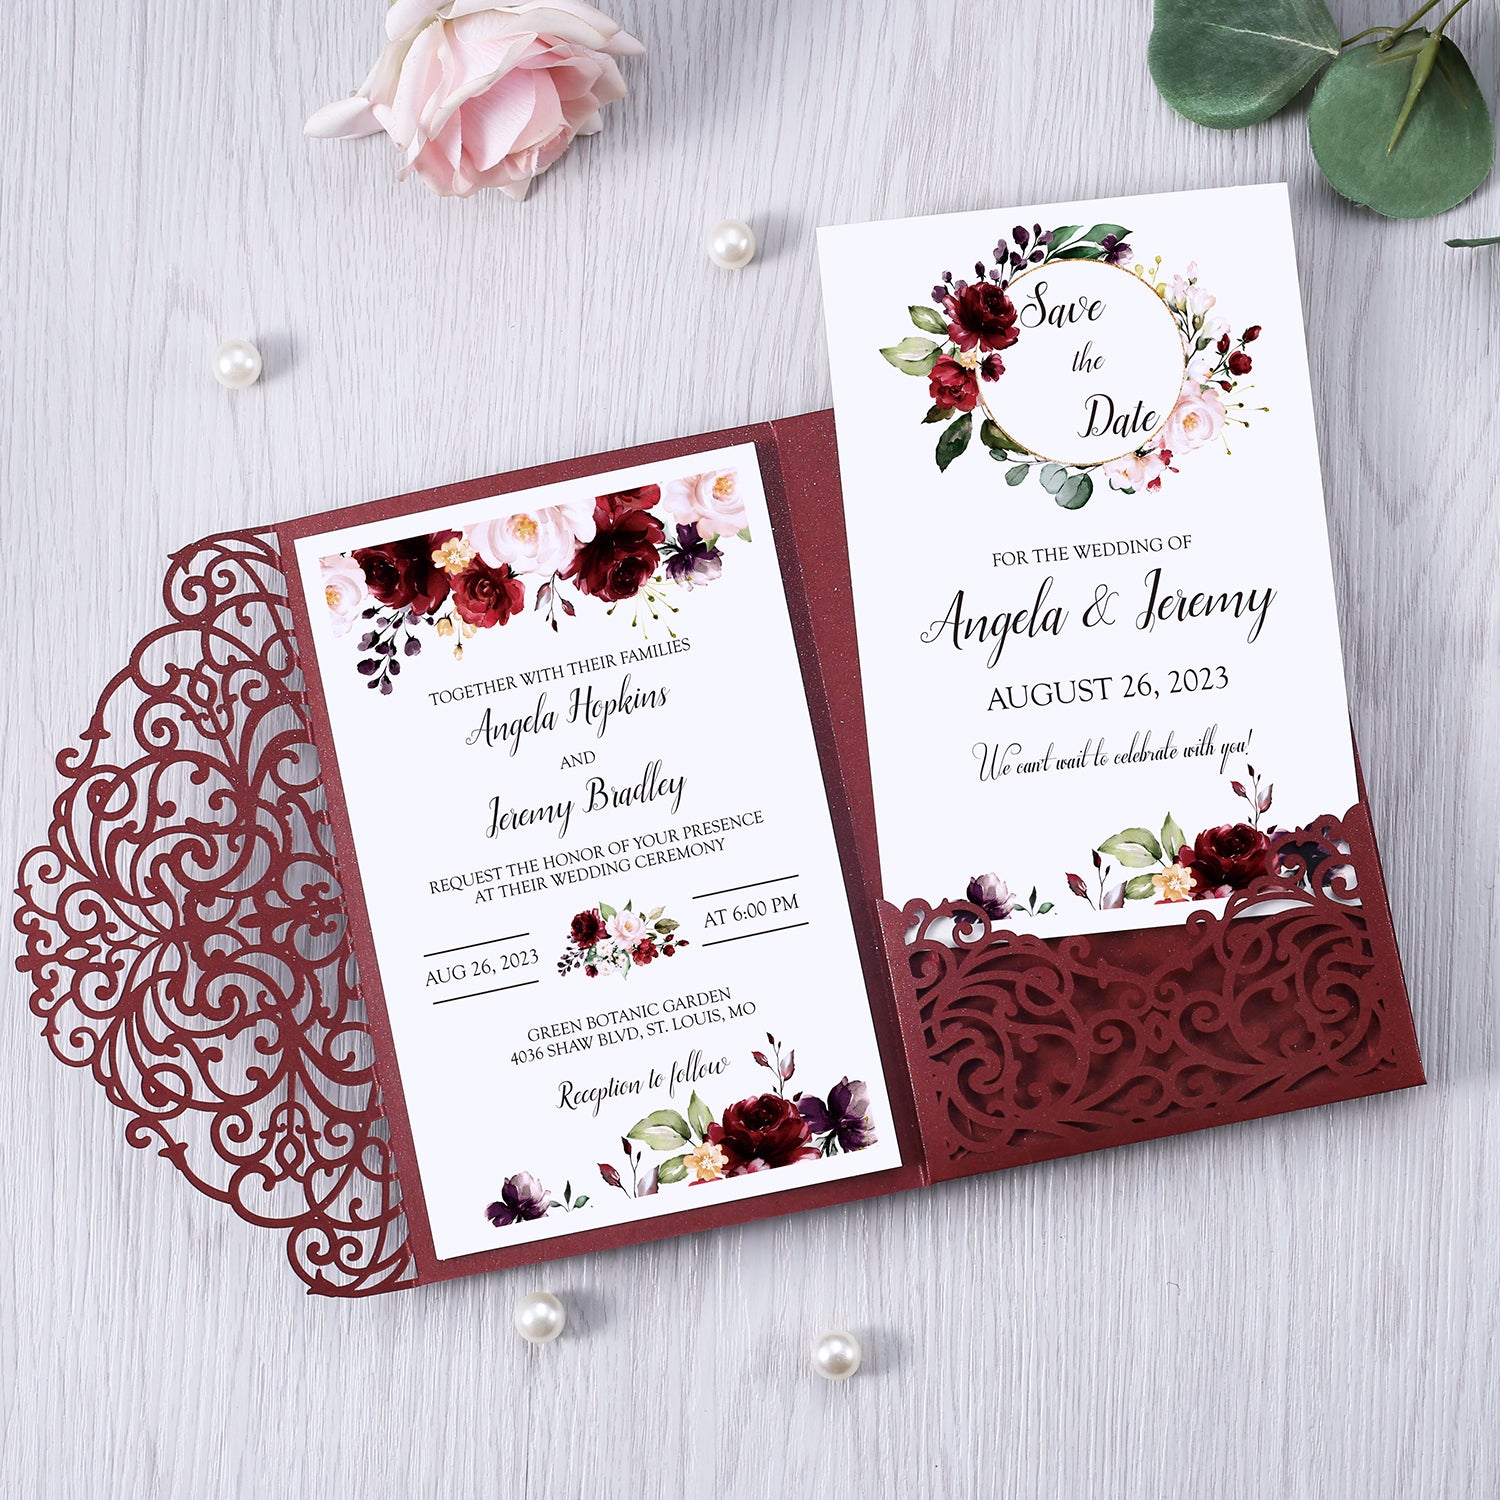 4.7 x7 inch Burgundy Laser Cut Hollow Rose Wedding Invitations Cards with Envelopes for Wedding Party - DorisHome